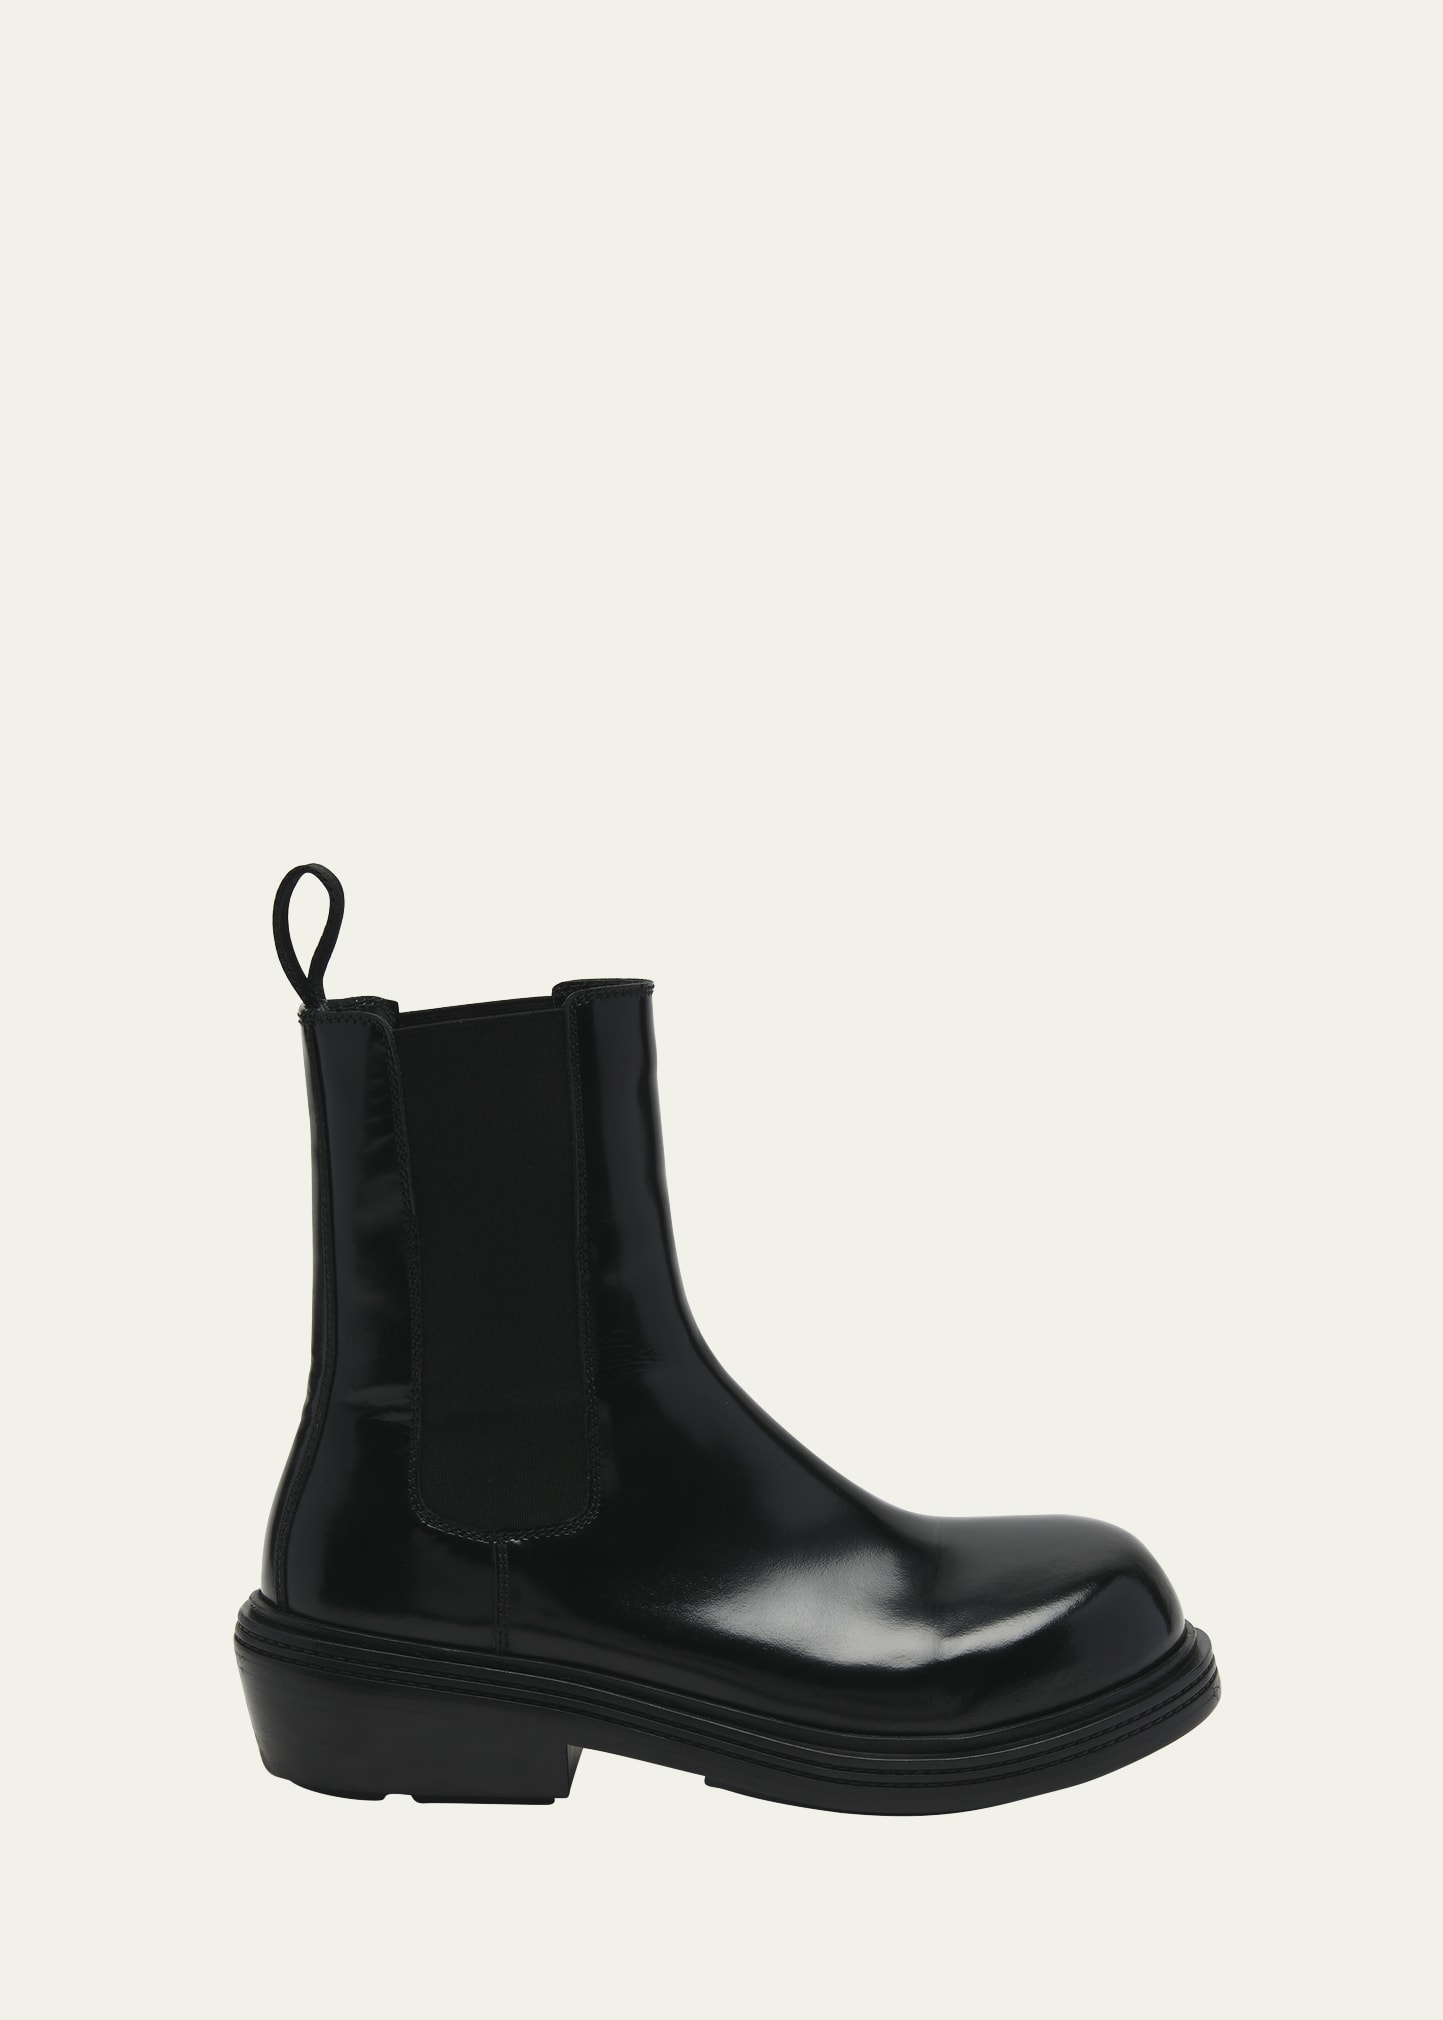 Fireman Calfskin Leather Ankle Boots